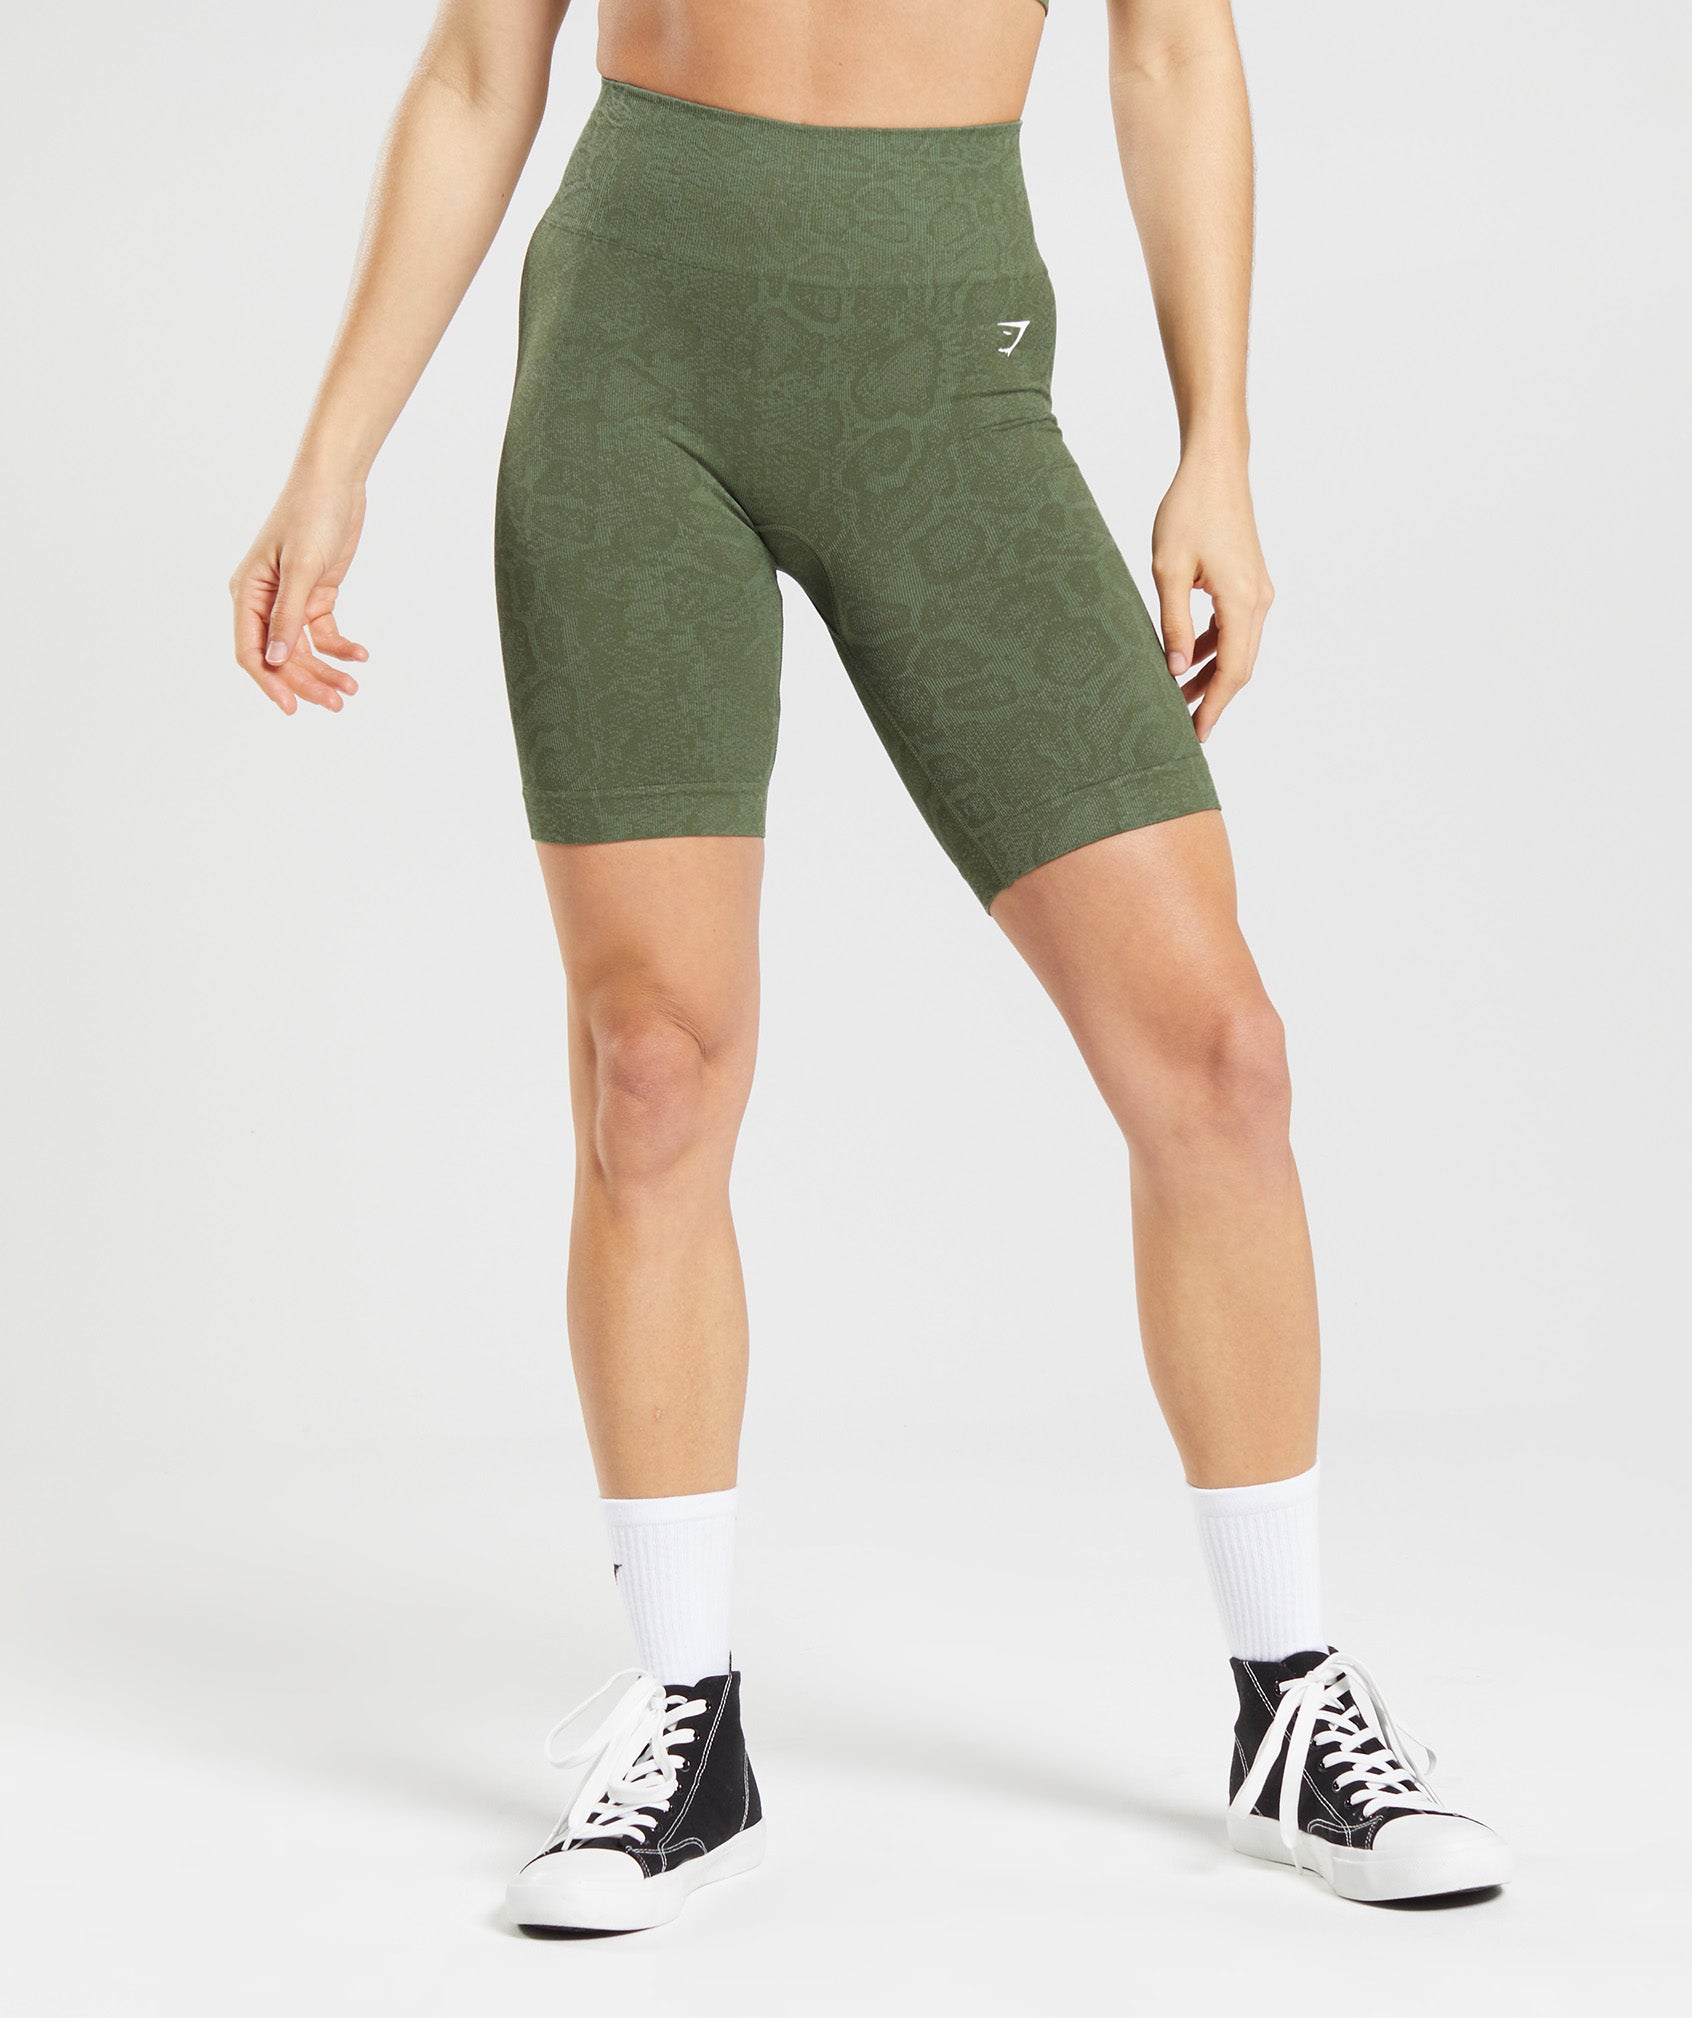 http://cdn.shopify.com/s/files/1/1367/5207/products/AdaptAnimalCyclingShortsENG-L-A0115WillowGreen-CoreOliveB4A7J-EB2R293_32a5a8d7-b2a6-4b3f-963e-4f15cd4b41eb.jpg?v=1679665046